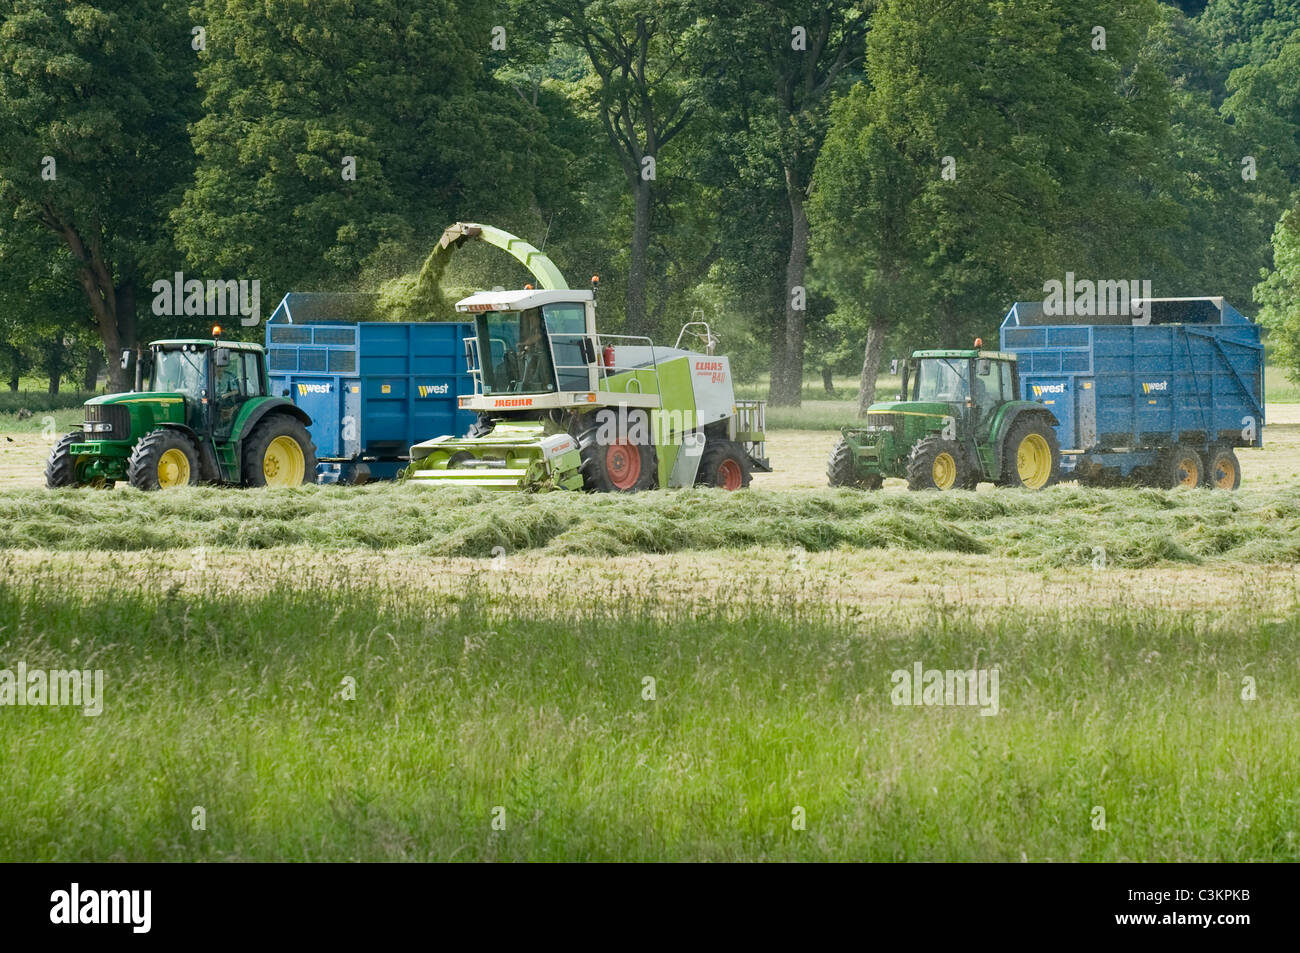 2 John Deere tractors & West trailers working & driving in farm field with Claas forage harvester, loading cut grass (silage) - Yorkshire, England UK. Stock Photo